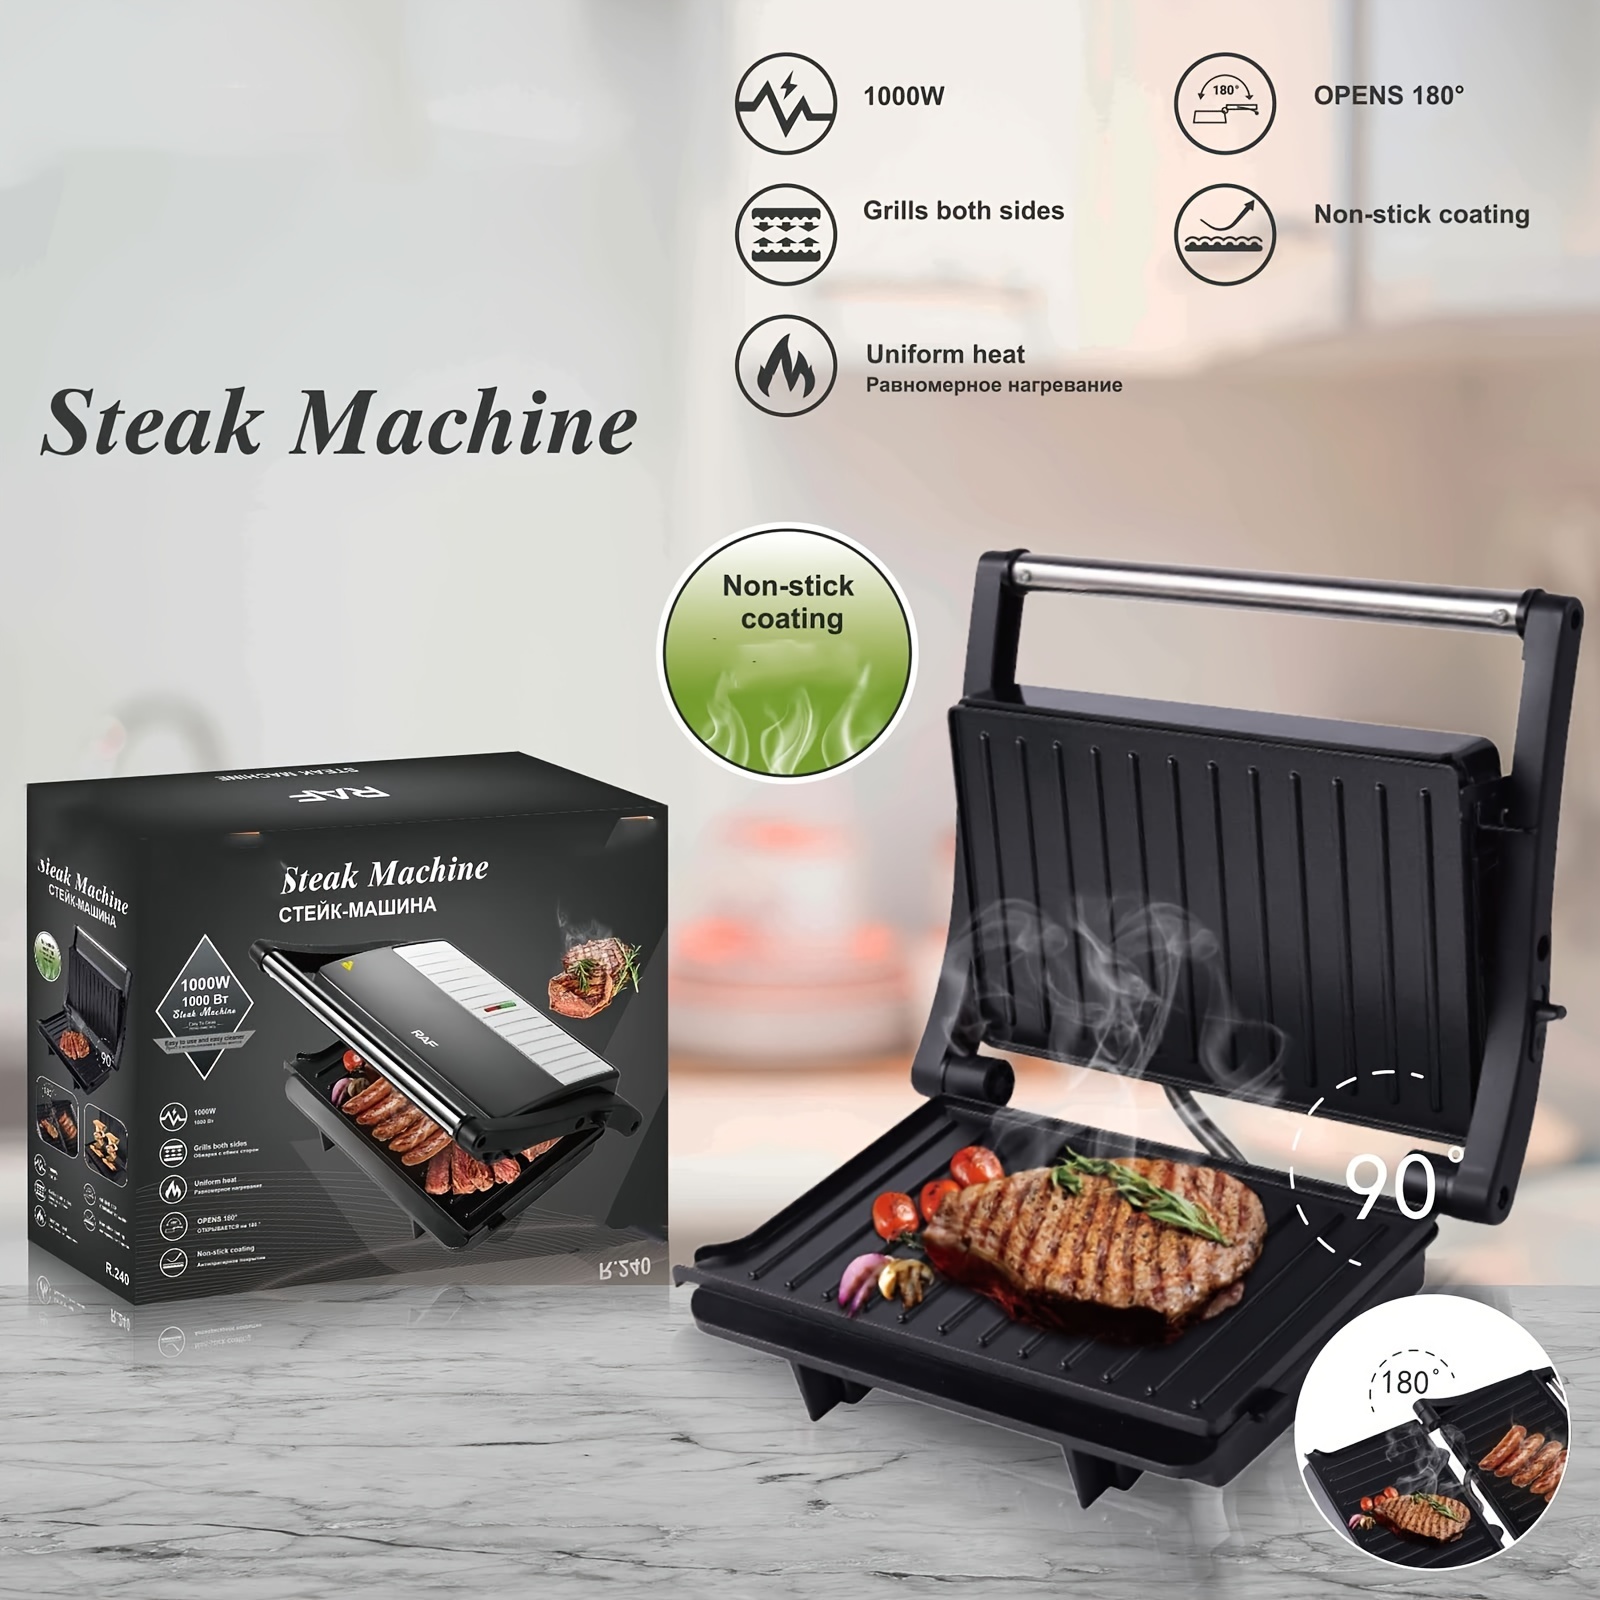 Delicious Grilled Meats At Home With The Maifanshi Electric Non